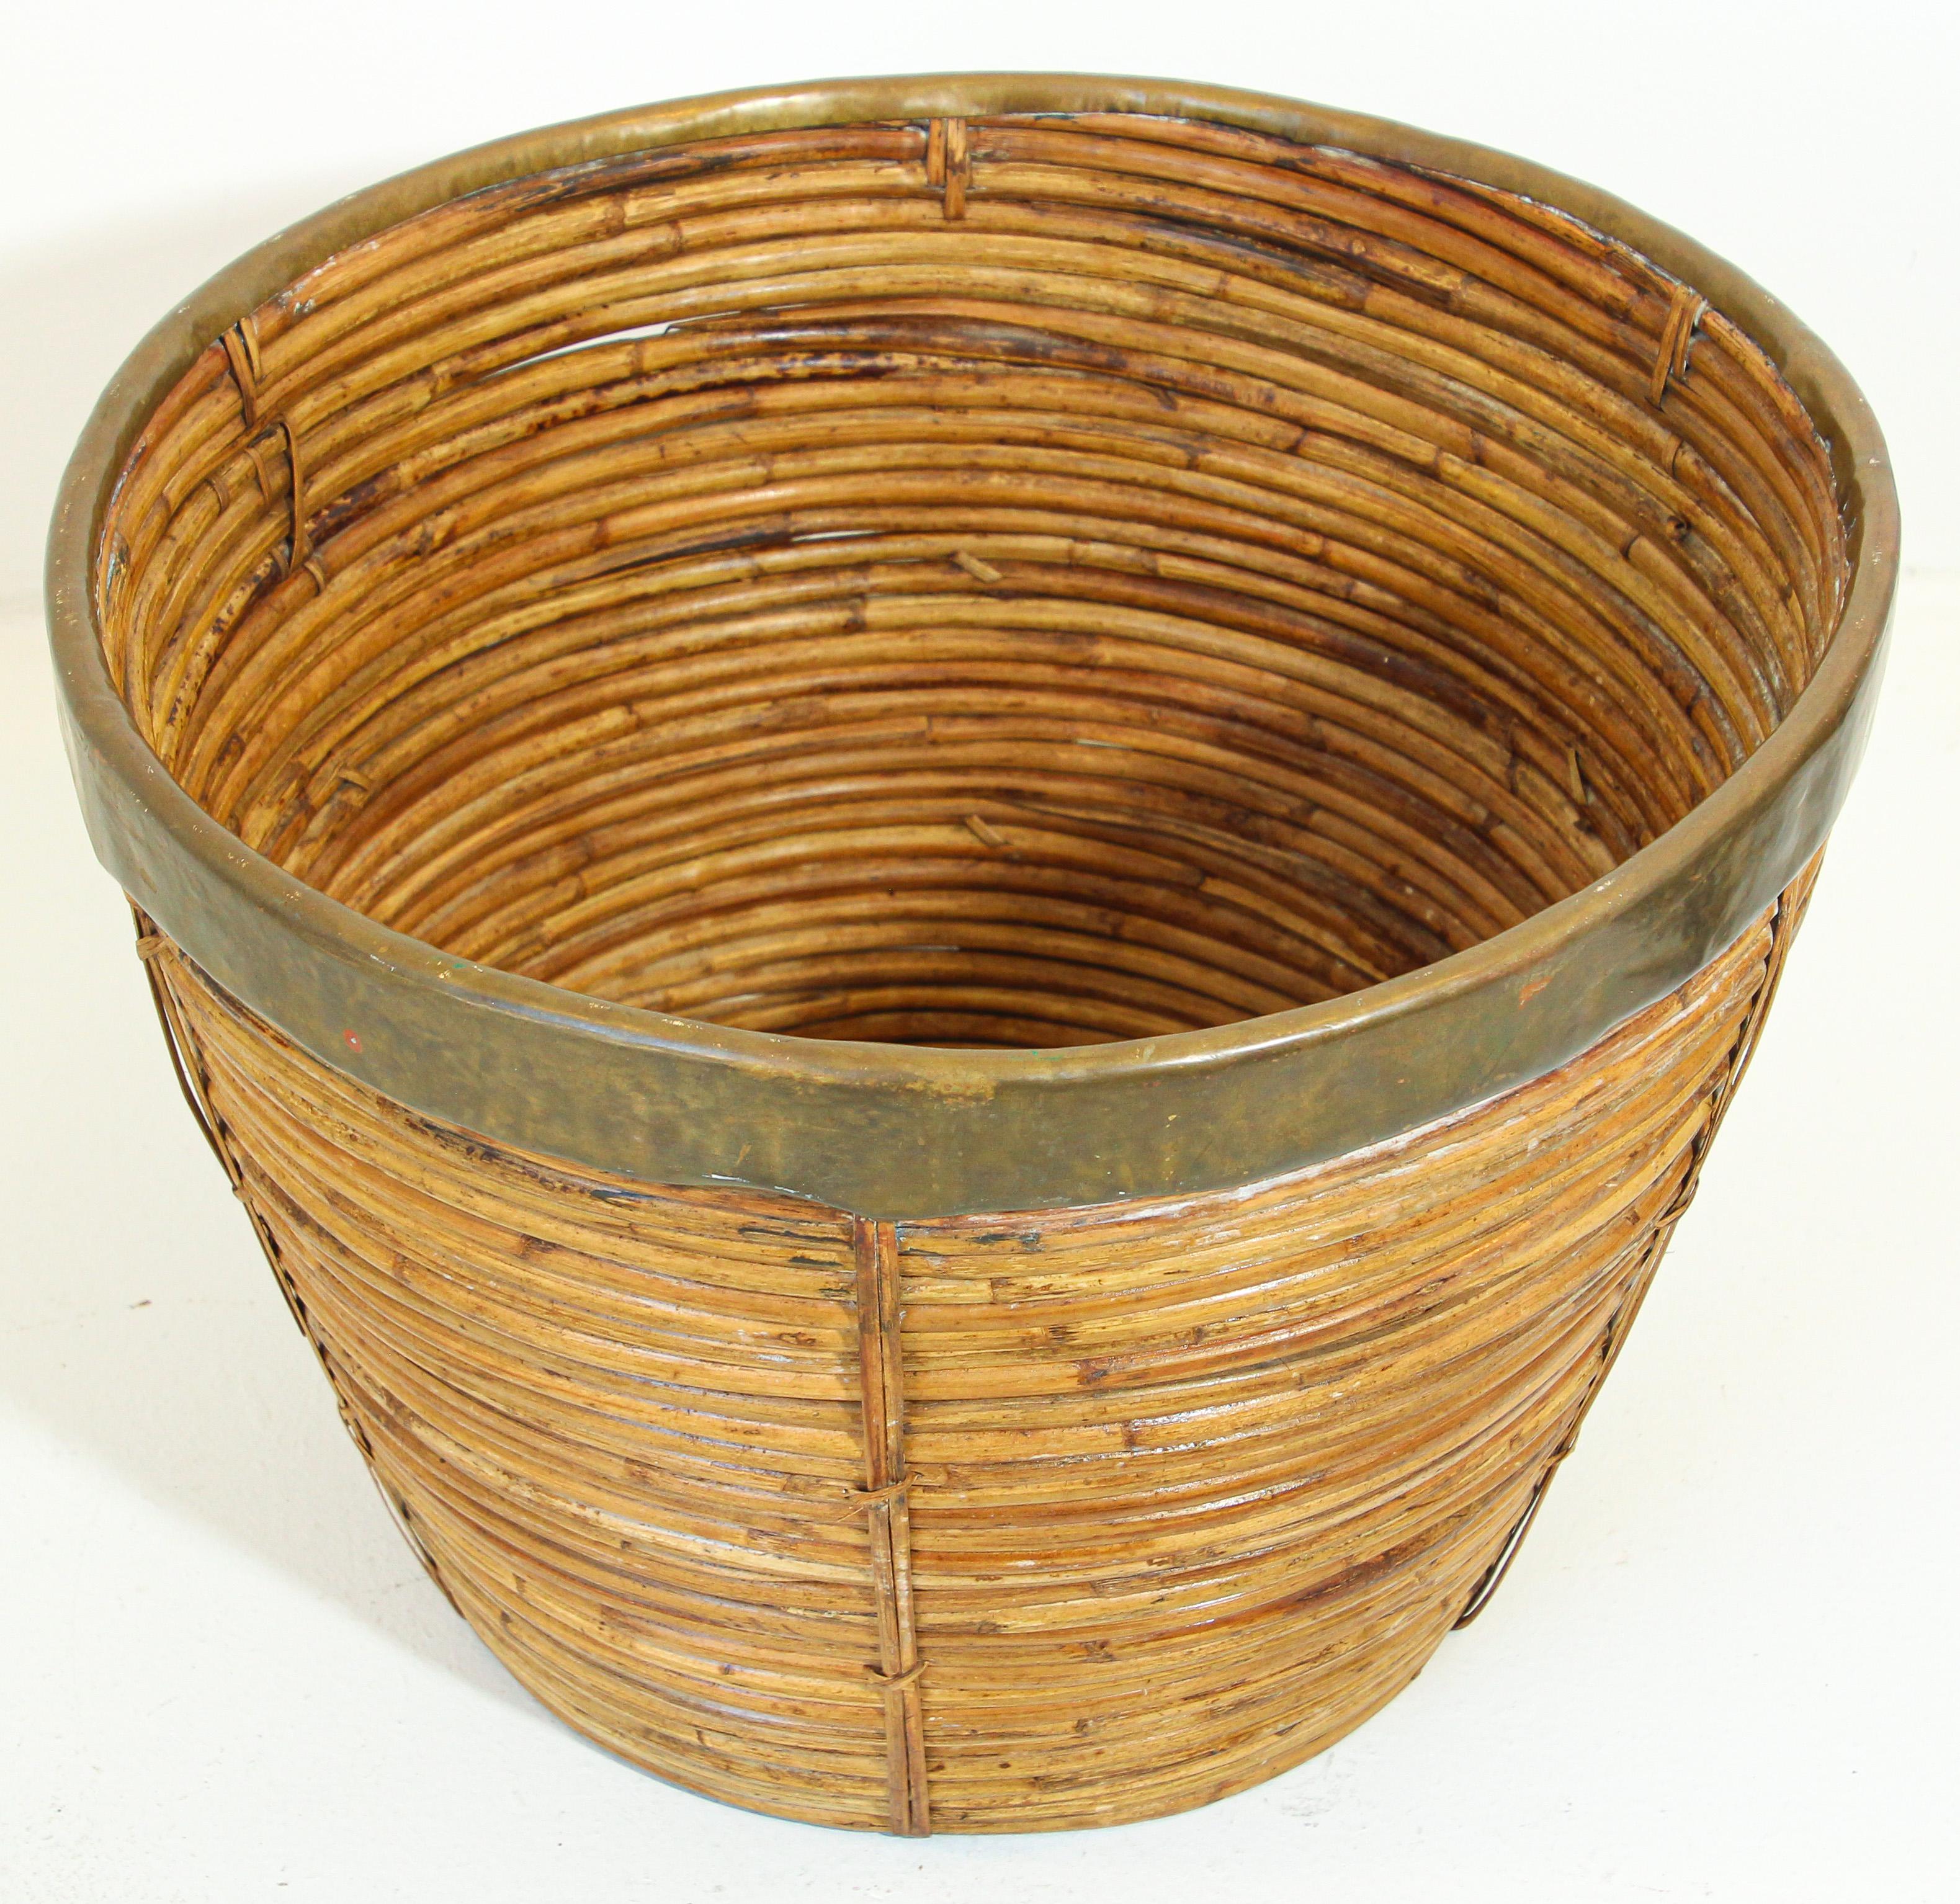 Large brass and rattan bamboo planter or basket.
Vintage Mid-Century Modern decorative handcrafted brass and rattan bamboo large planter.
Round shape with gilded brass rim.
Can be use as a planter or large decorative basket or